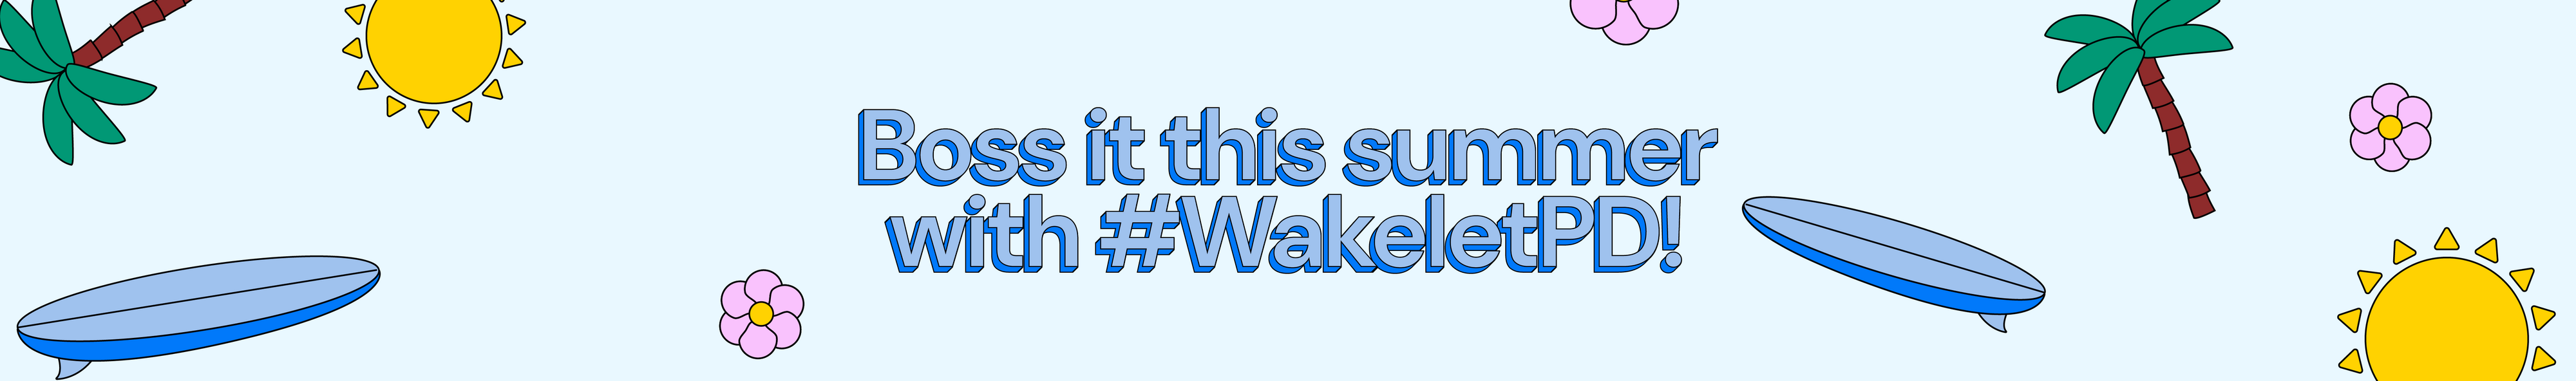 Wakelet PD's background image'